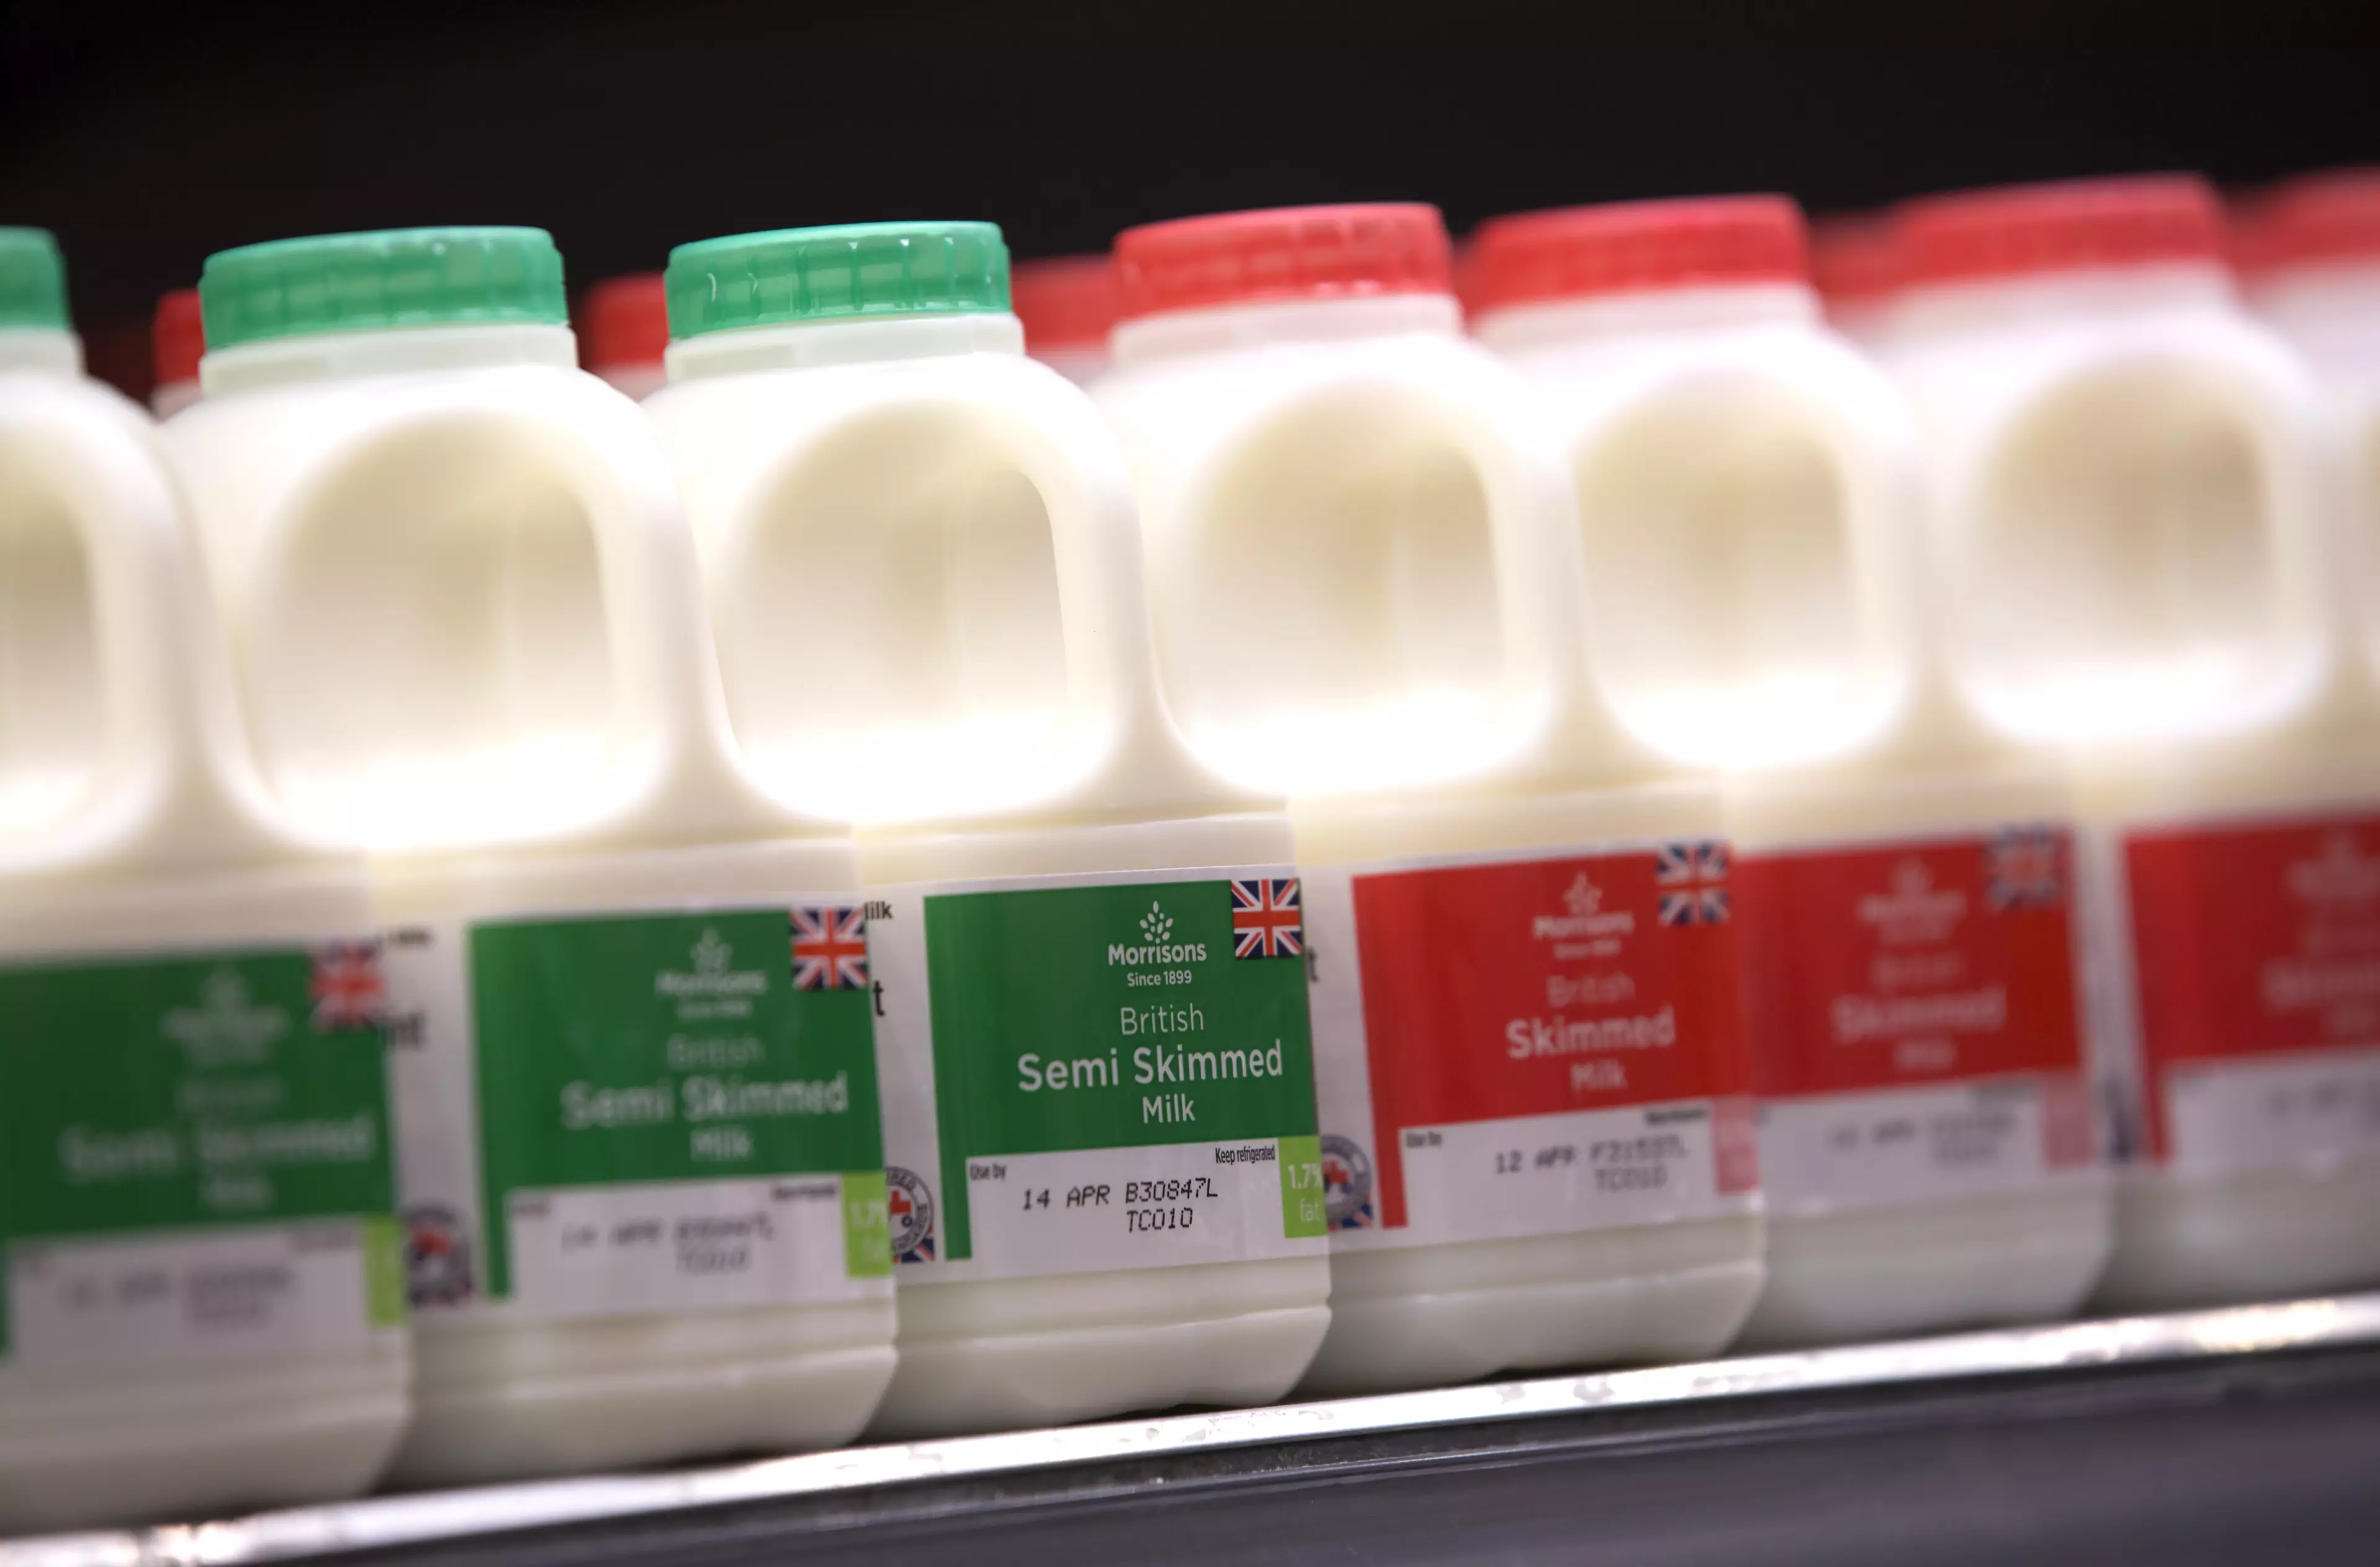 Lawyer Alex Monaco thinks vegans shouldn't have to buy milk for workplace brews.